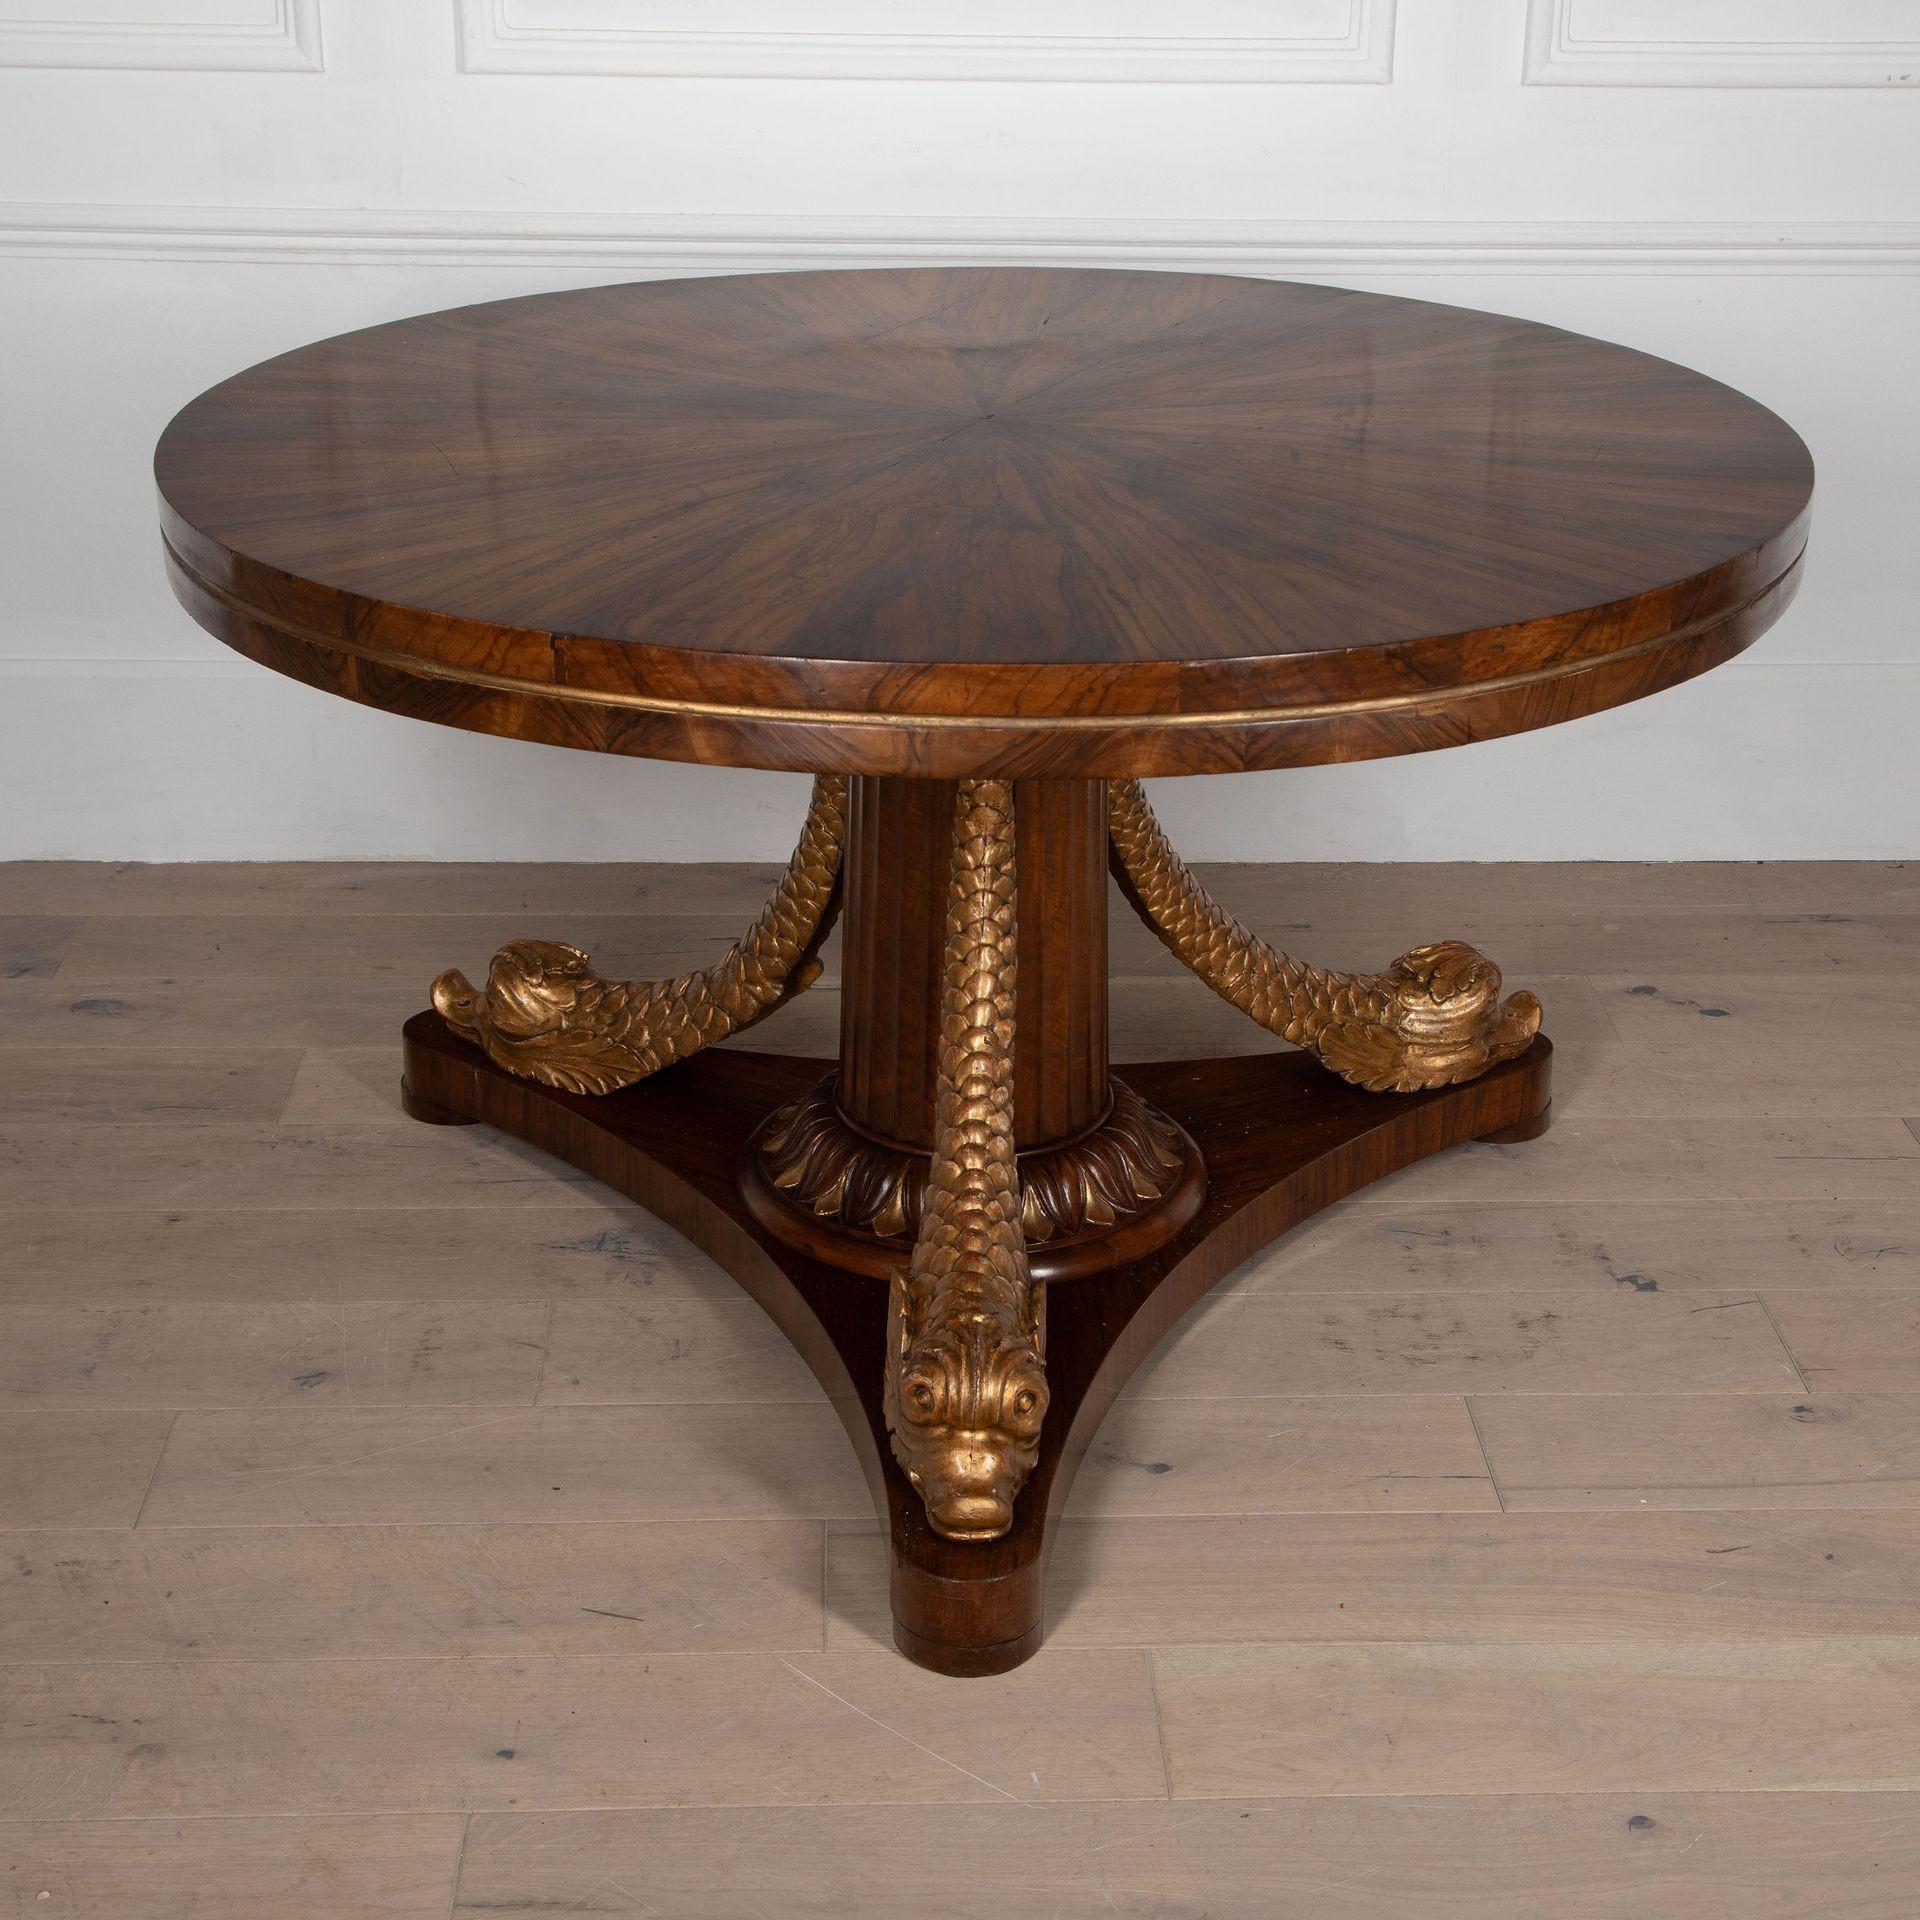 An incredible Italian coromandel centre table on a fluted base.
The top terminates on carved giltwood dolphins.